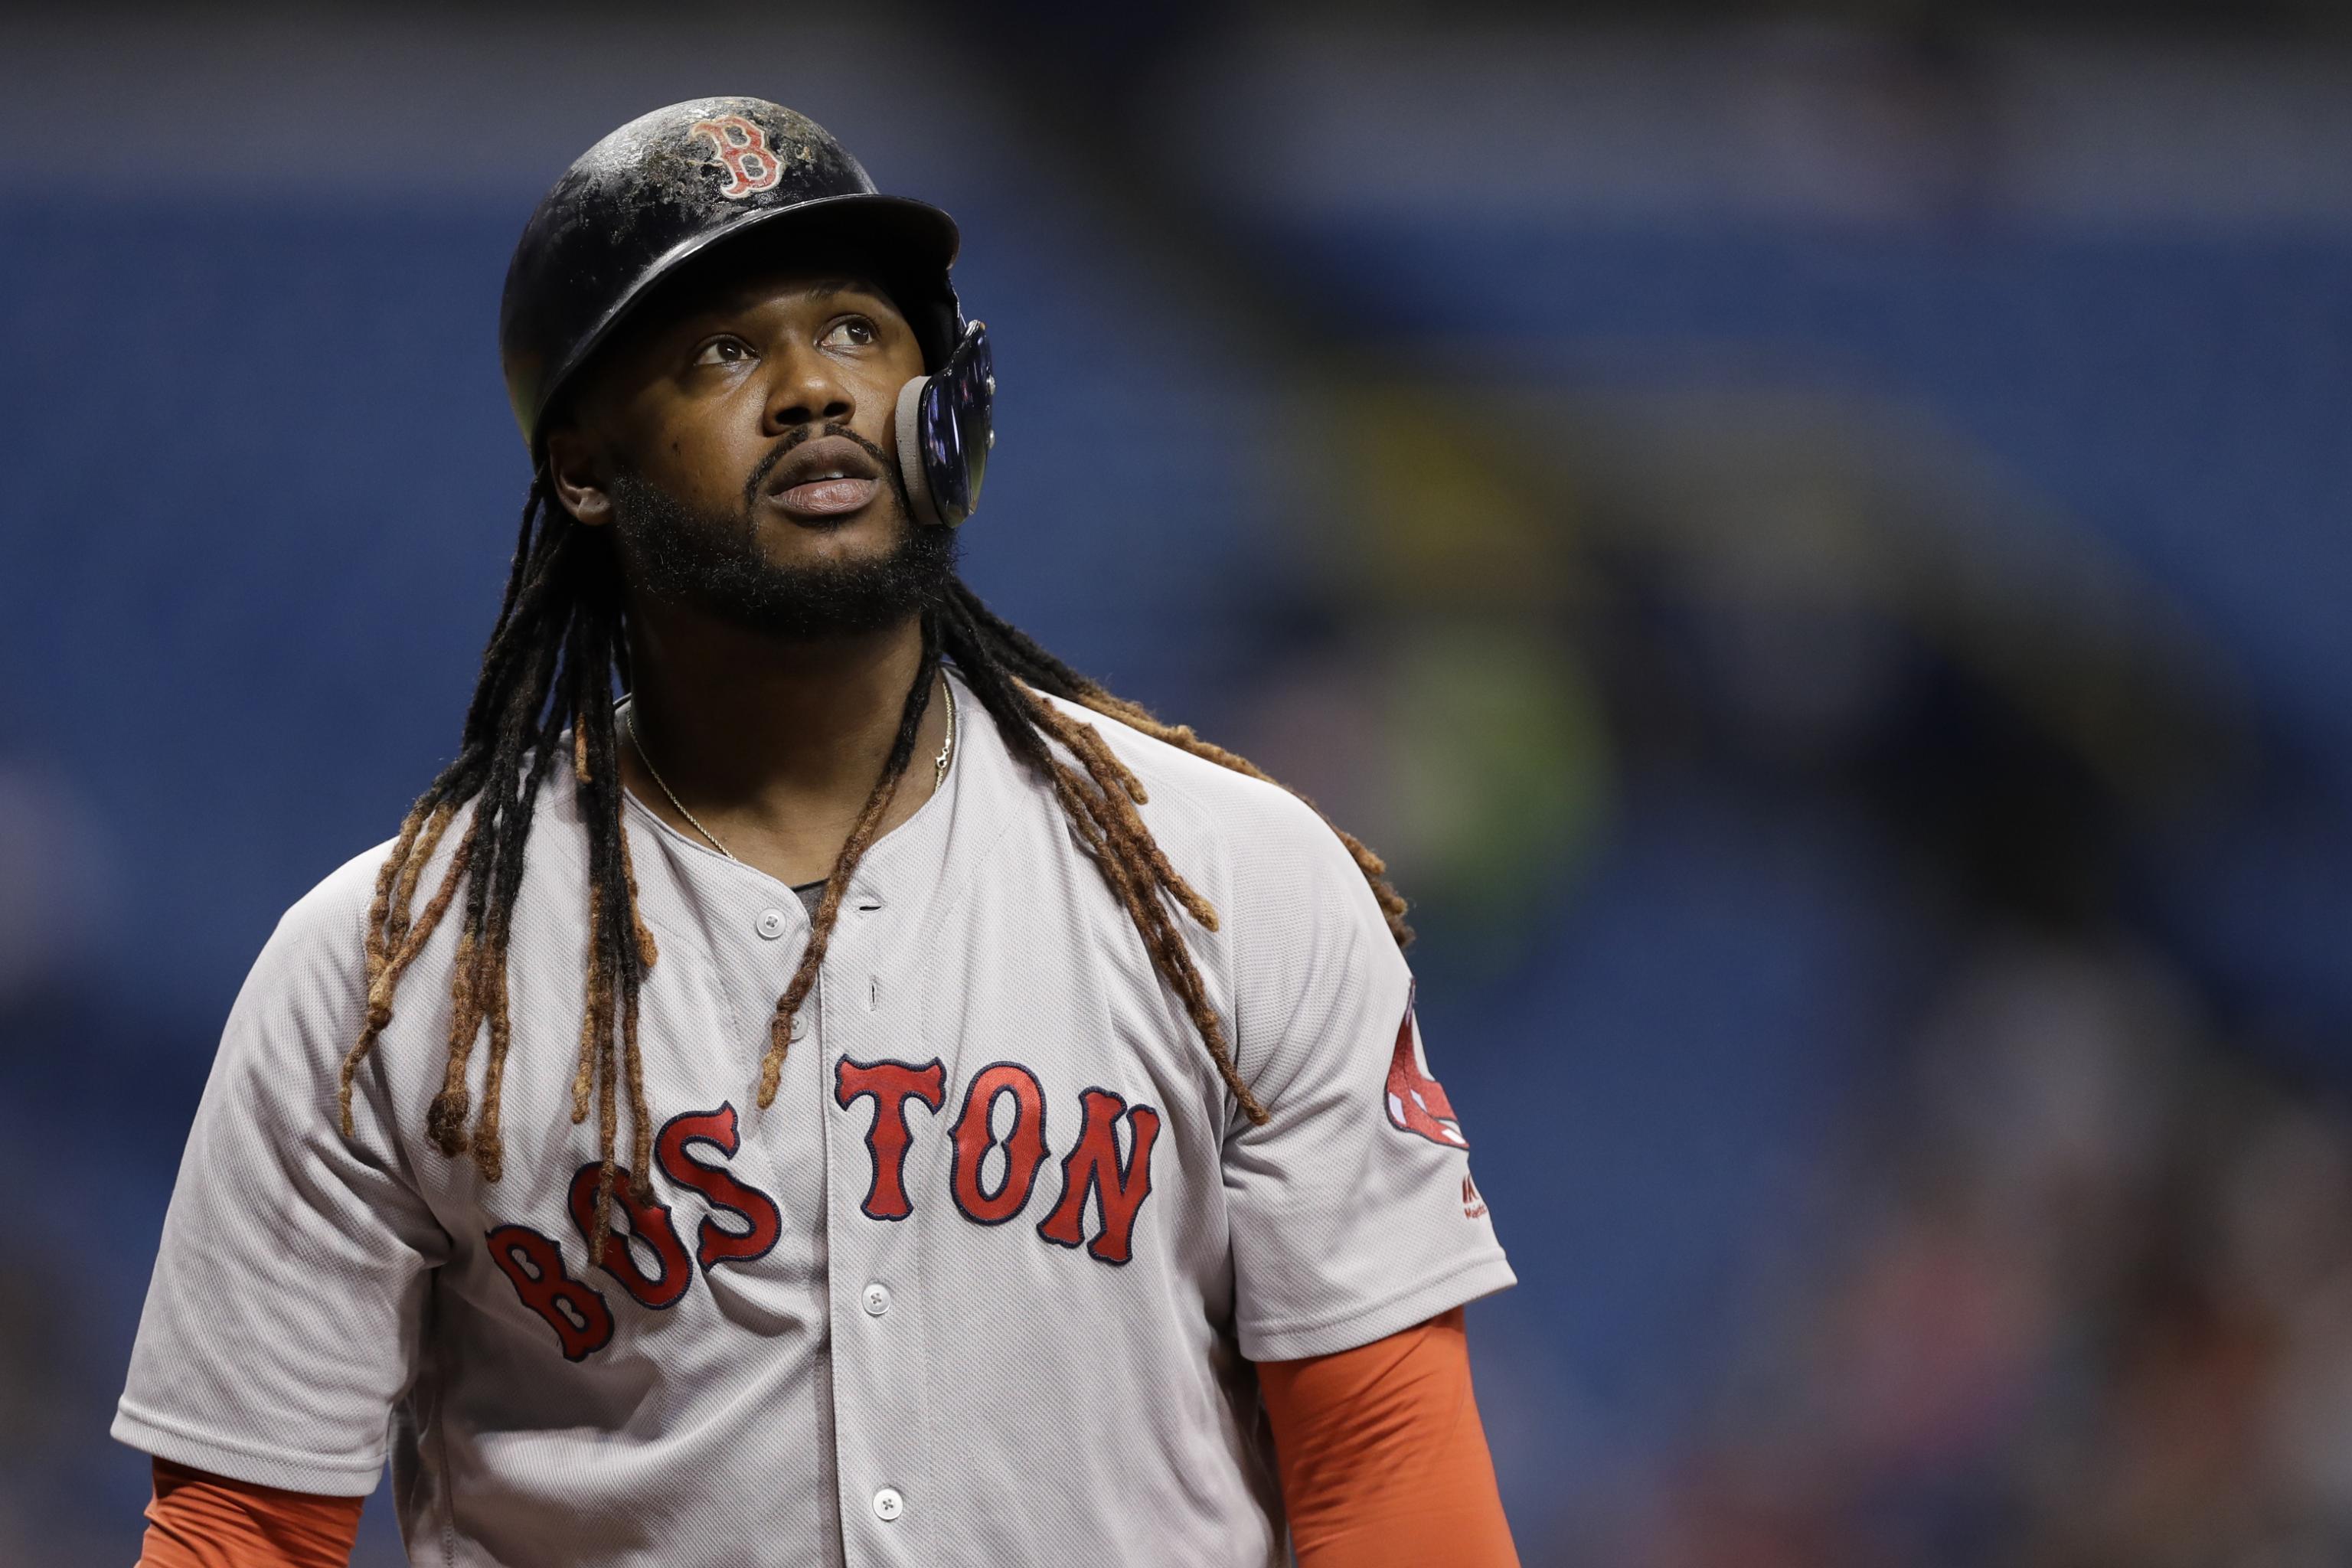 Hanley Ramirez Is the Former $88M Superstar No MLB Team Wants to